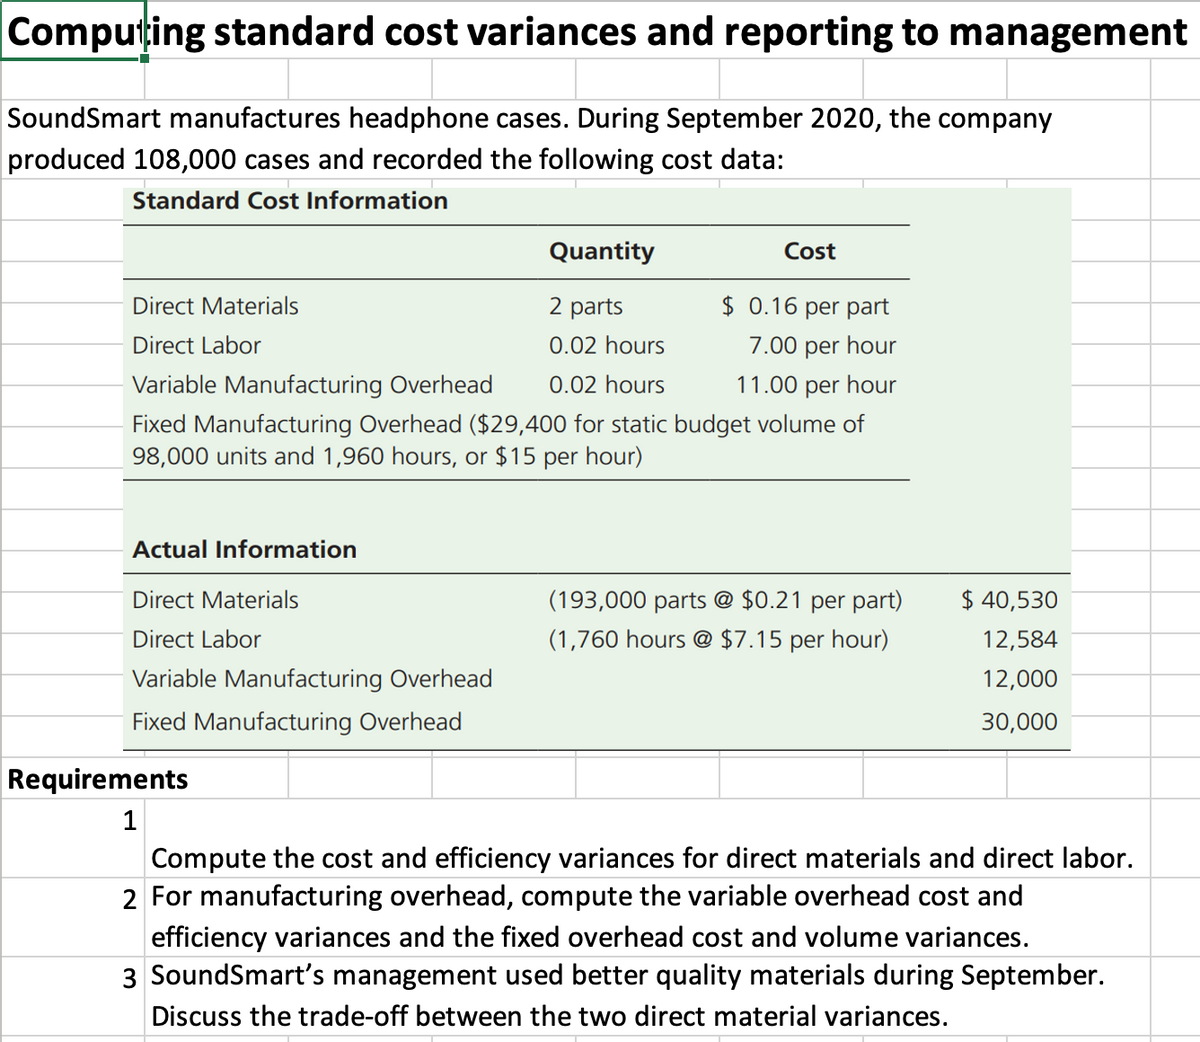 Compuțing standard cost variances and reporting to management
SoundSmart manufactures headphone cases. During September 2020, the company
produced 108,000 cases and recorded the following cost data:
Standard Cost Information
Quantity
Cost
Direct Materials
2 parts
$ 0.16 per part
Direct Labor
0.02 hours
7.00 per hour
Variable Manufacturing Overhead
0.02 hours
11.00 per hour
Fixed Manufacturing Overhead ($29,400 for static budget volume of
98,000 units and 1,960 hours, or $15 per hour)
Actual Information
Direct Materials
(193,000 parts @ $0.21 per part)
$ 40,530
Direct Labor
(1,760 hours @ $7.15 per hour)
12,584
Variable Manufacturing Overhead
12,000
Fixed Manufacturing Overhead
30,000
Requirements
1
Compute the cost and efficiency variances for direct materials and direct labor.
2 For manufacturing overhead, compute the variable overhead cost and
efficiency variances and the fixed overhead cost and volume variances.
3 SoundSmart's management used better quality materials during September.
Discuss the trade-off between the two direct material variances.
